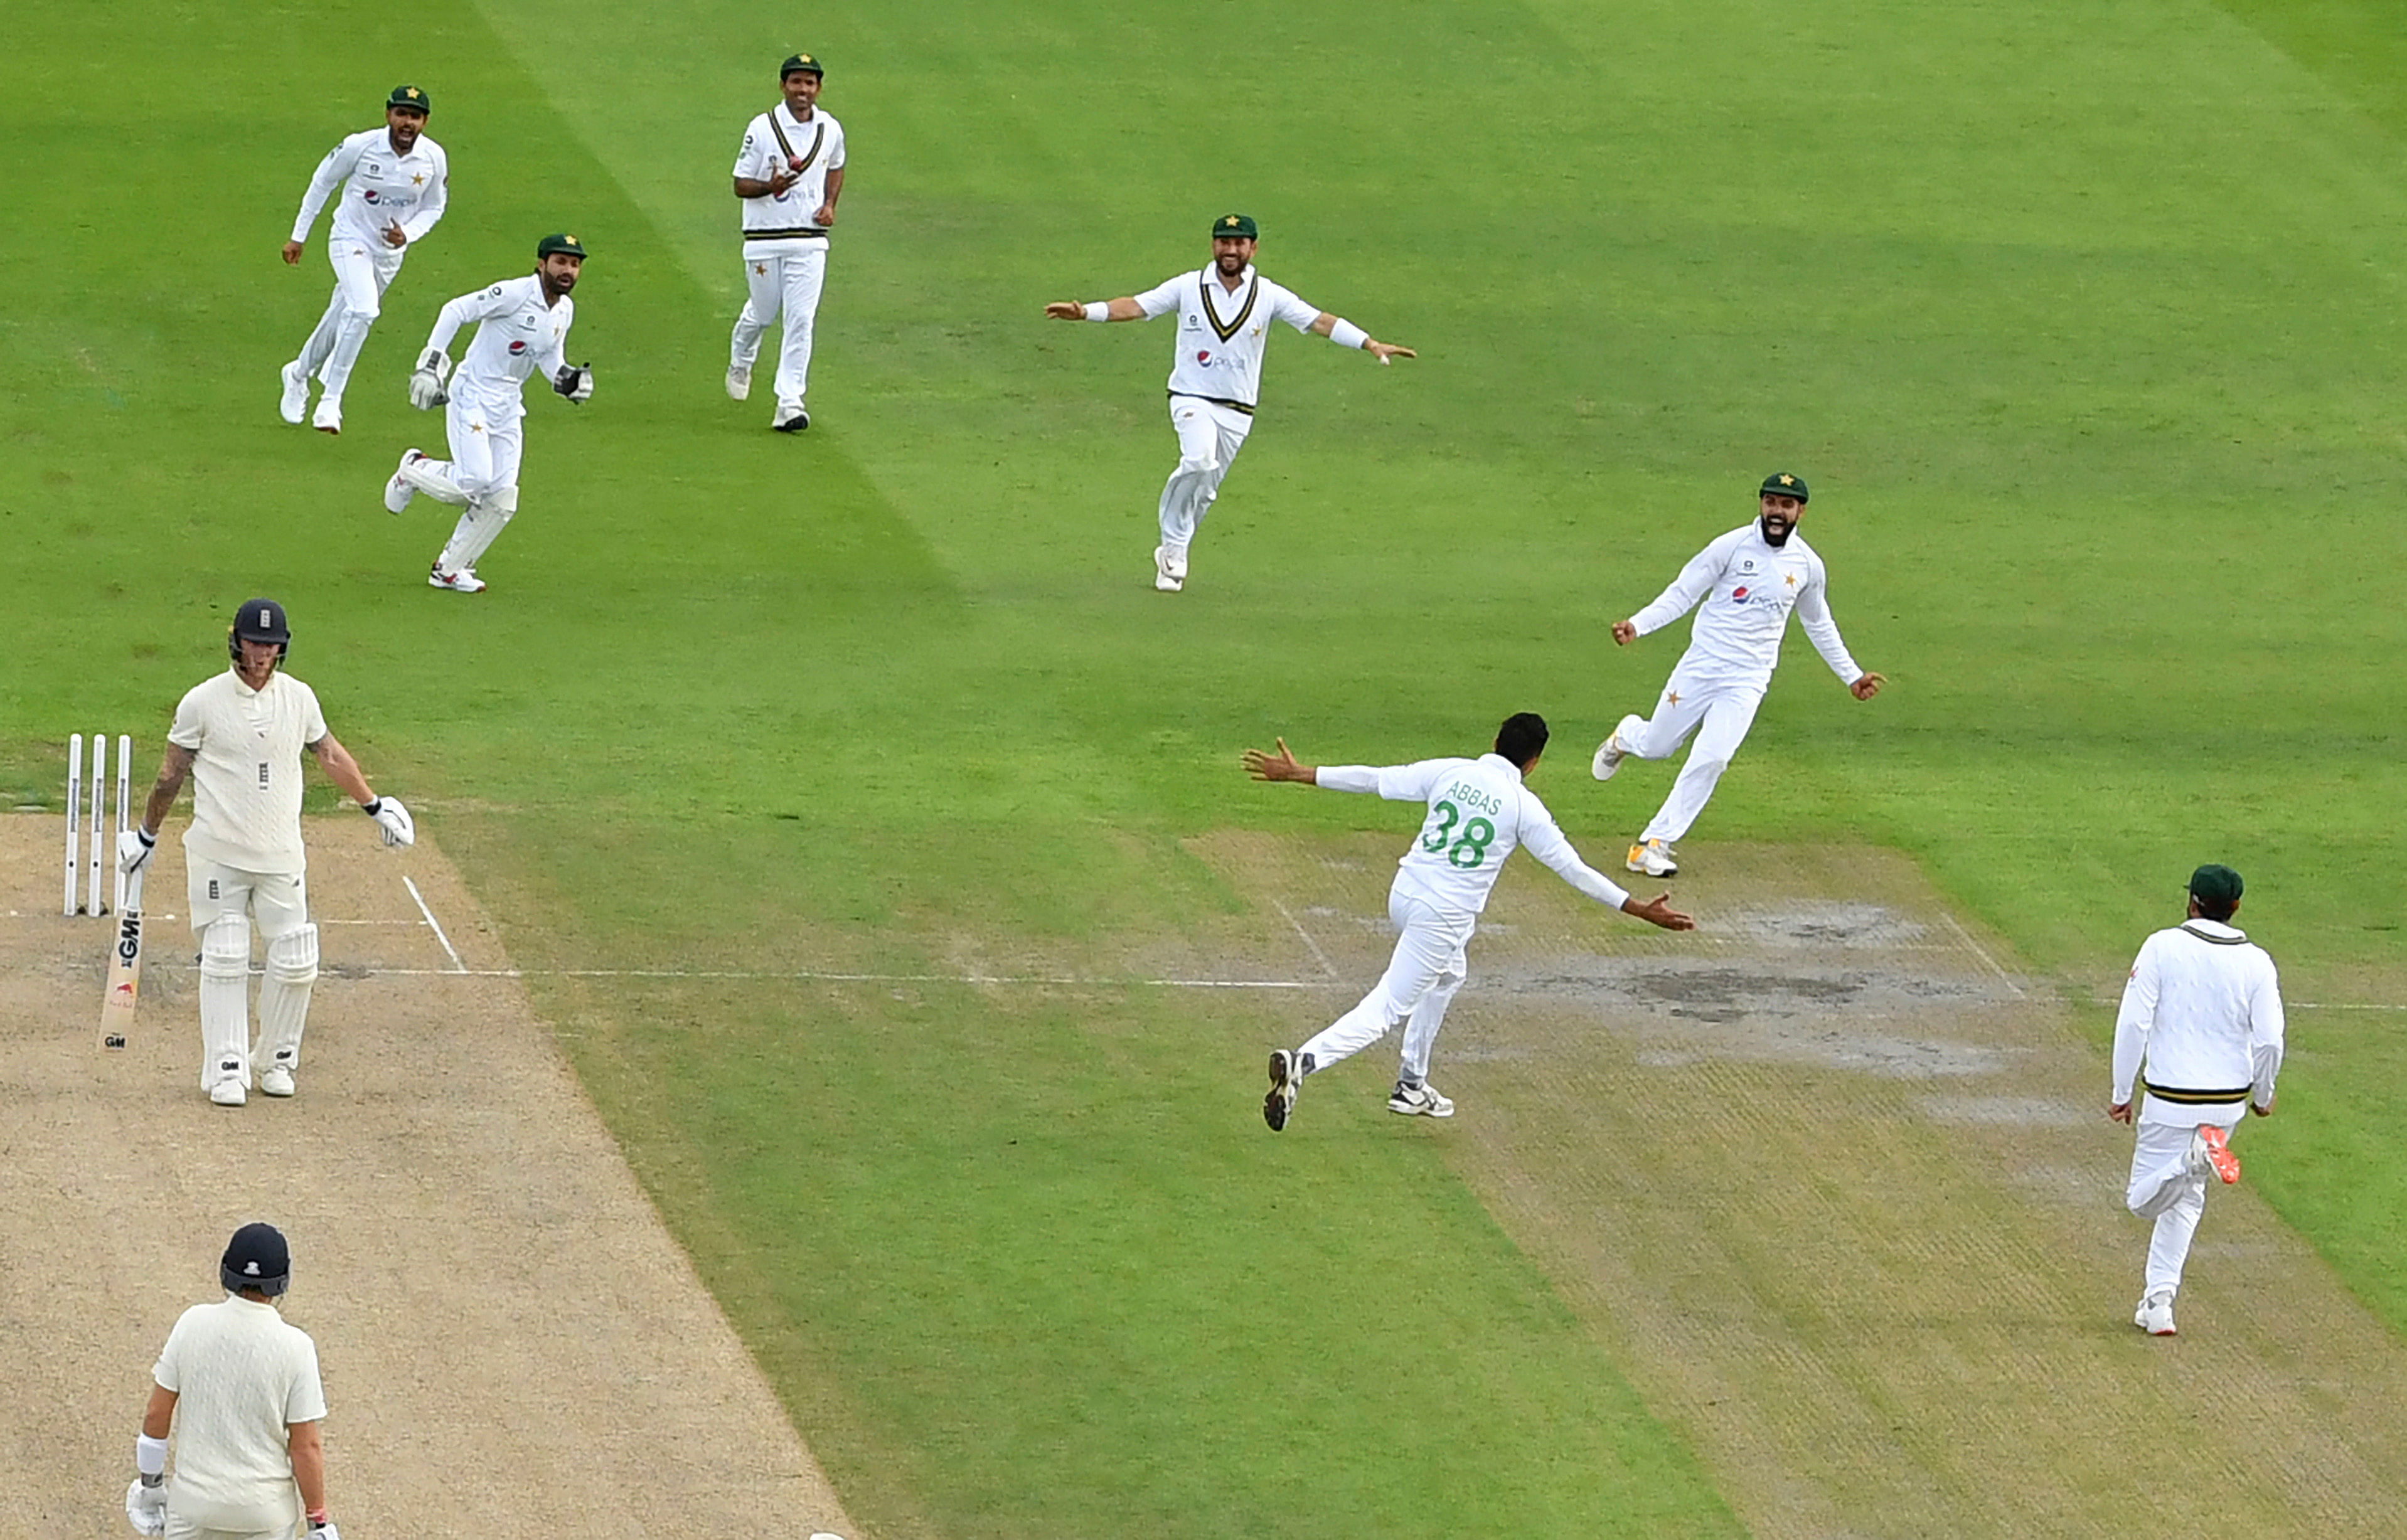 Pakistan's Mohammad Abbas, third right, and teammates celebrate the dismissal of England's Ben Stokes, left, during the second day of the first cricket Test match between England and Pakistan at Old Trafford in Manchester, England, Thursday, Aug. 6, 2020. Credit: AP/PTI Photo